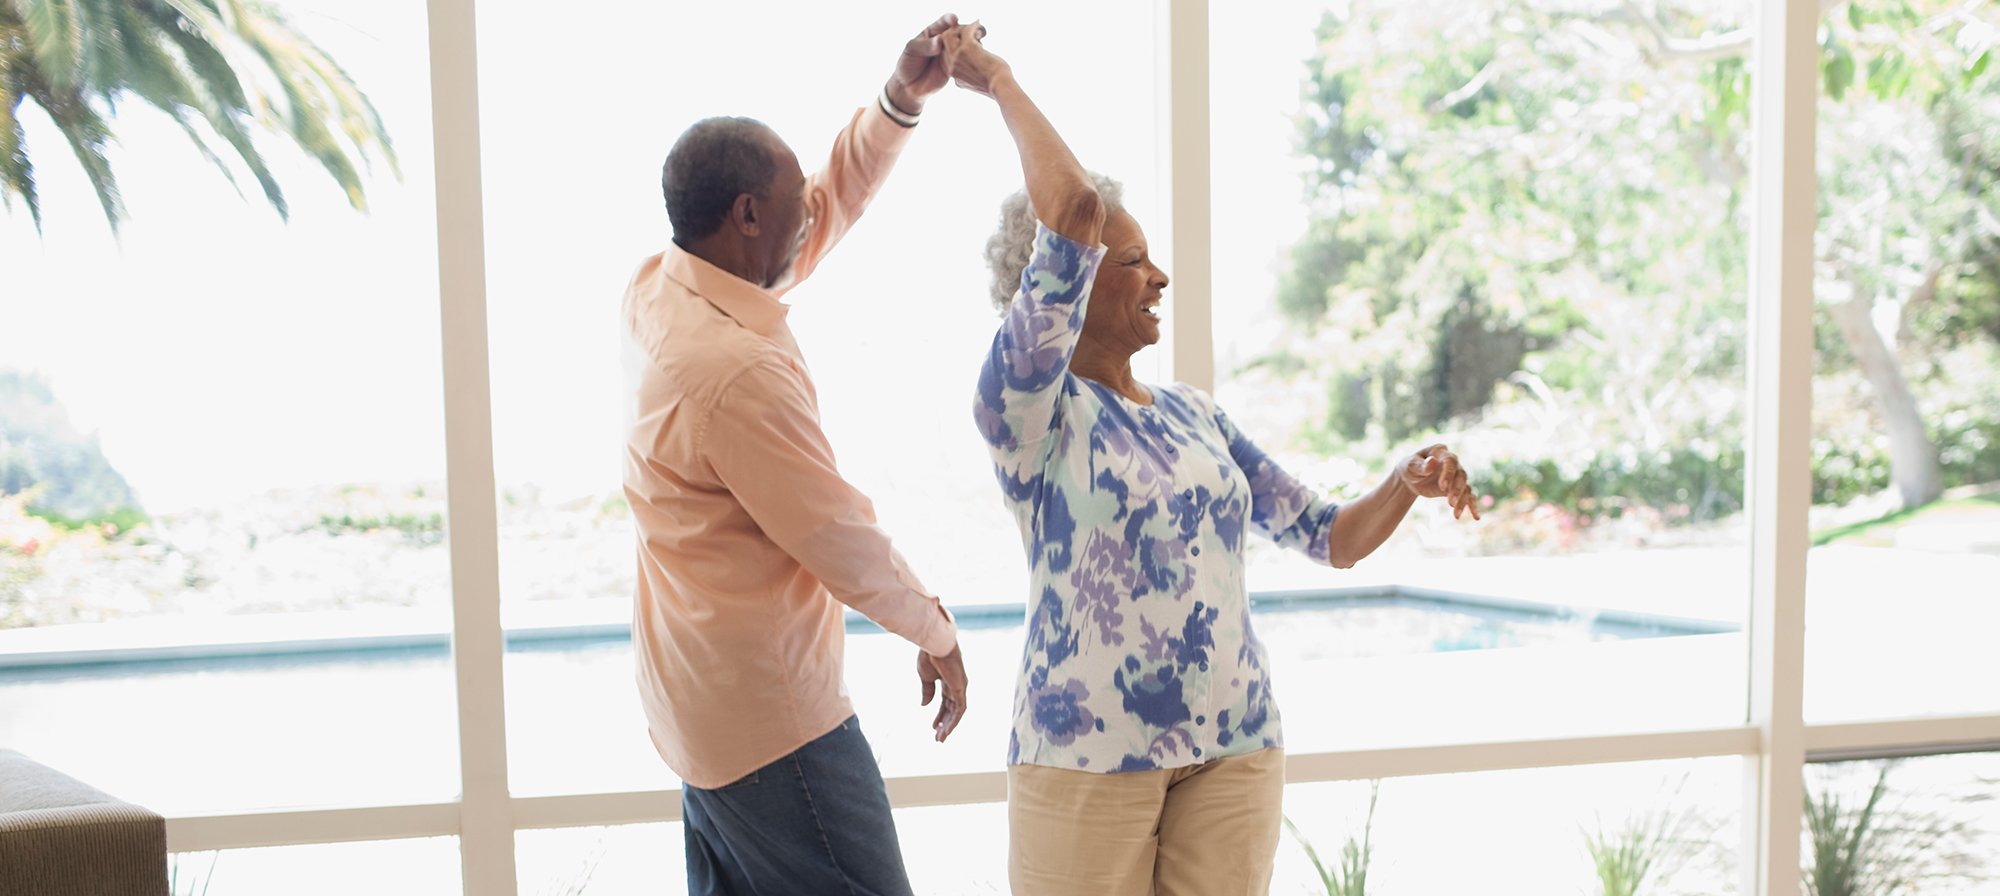 Let Dancing Take the Work Out of Your Workouts